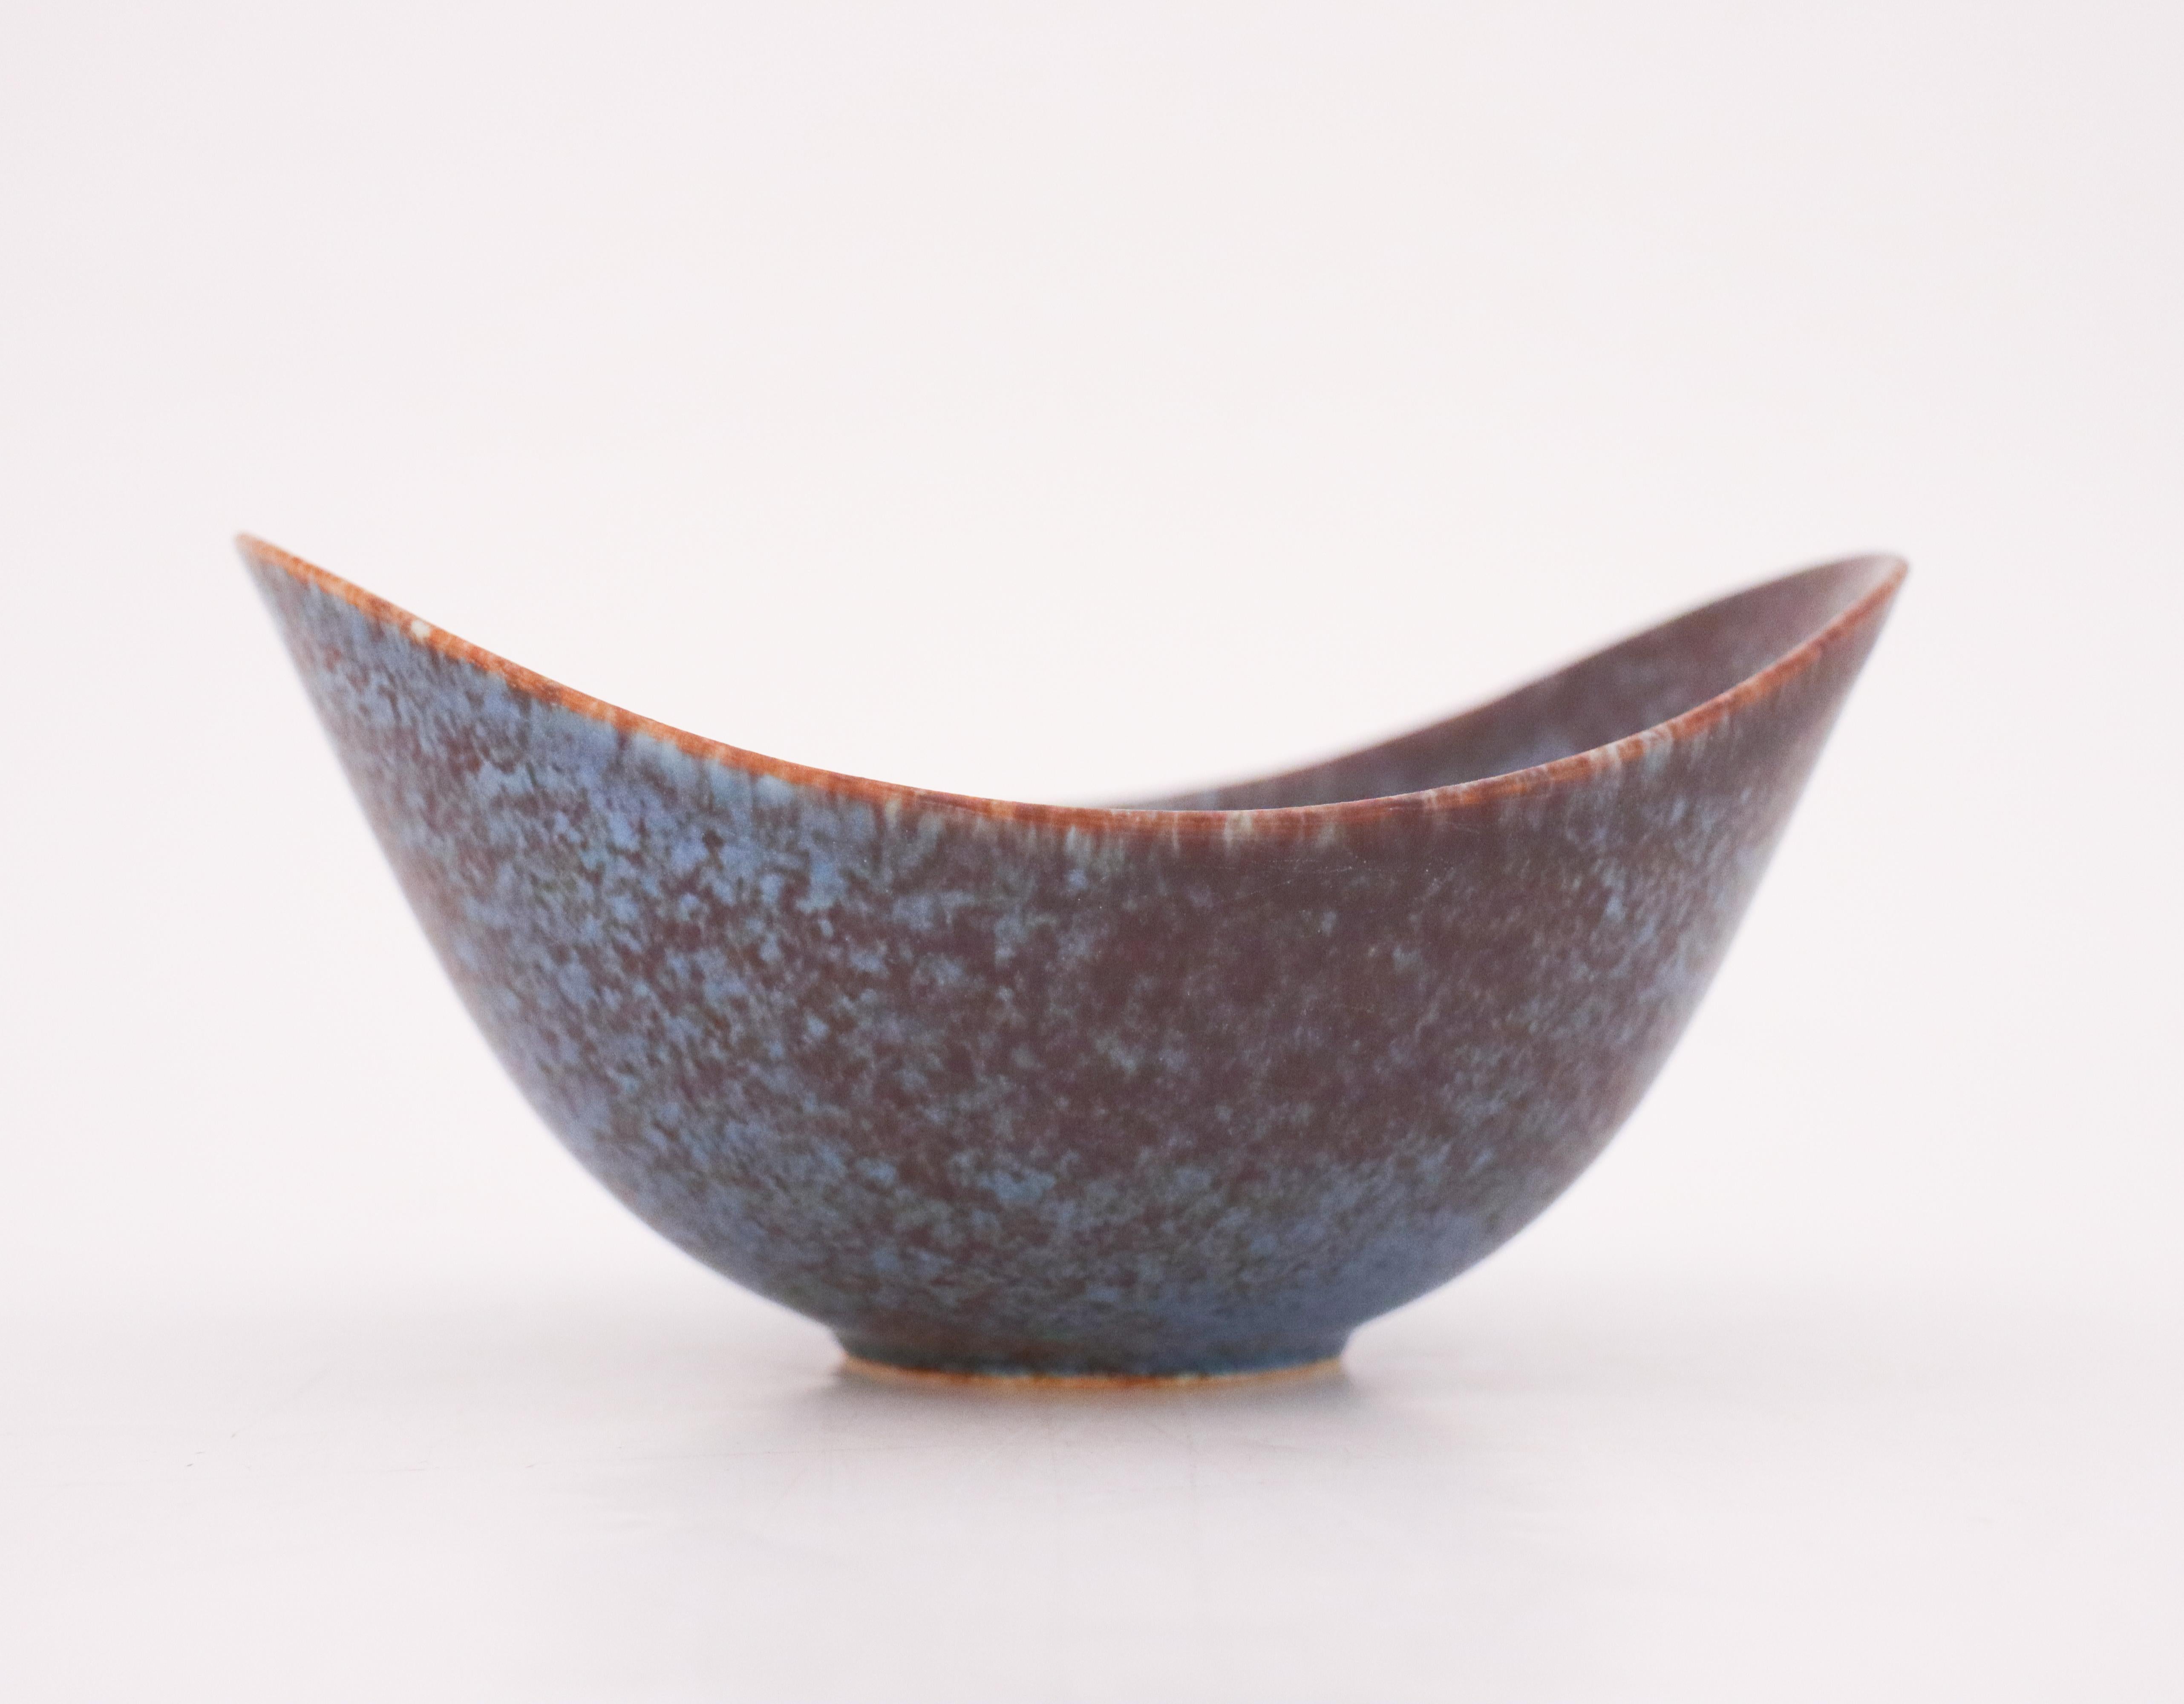 A brown & blue bowl designed by Gunnar Nylund at Rörstrand, the bowl is 16 x 12.5 cm (6.4